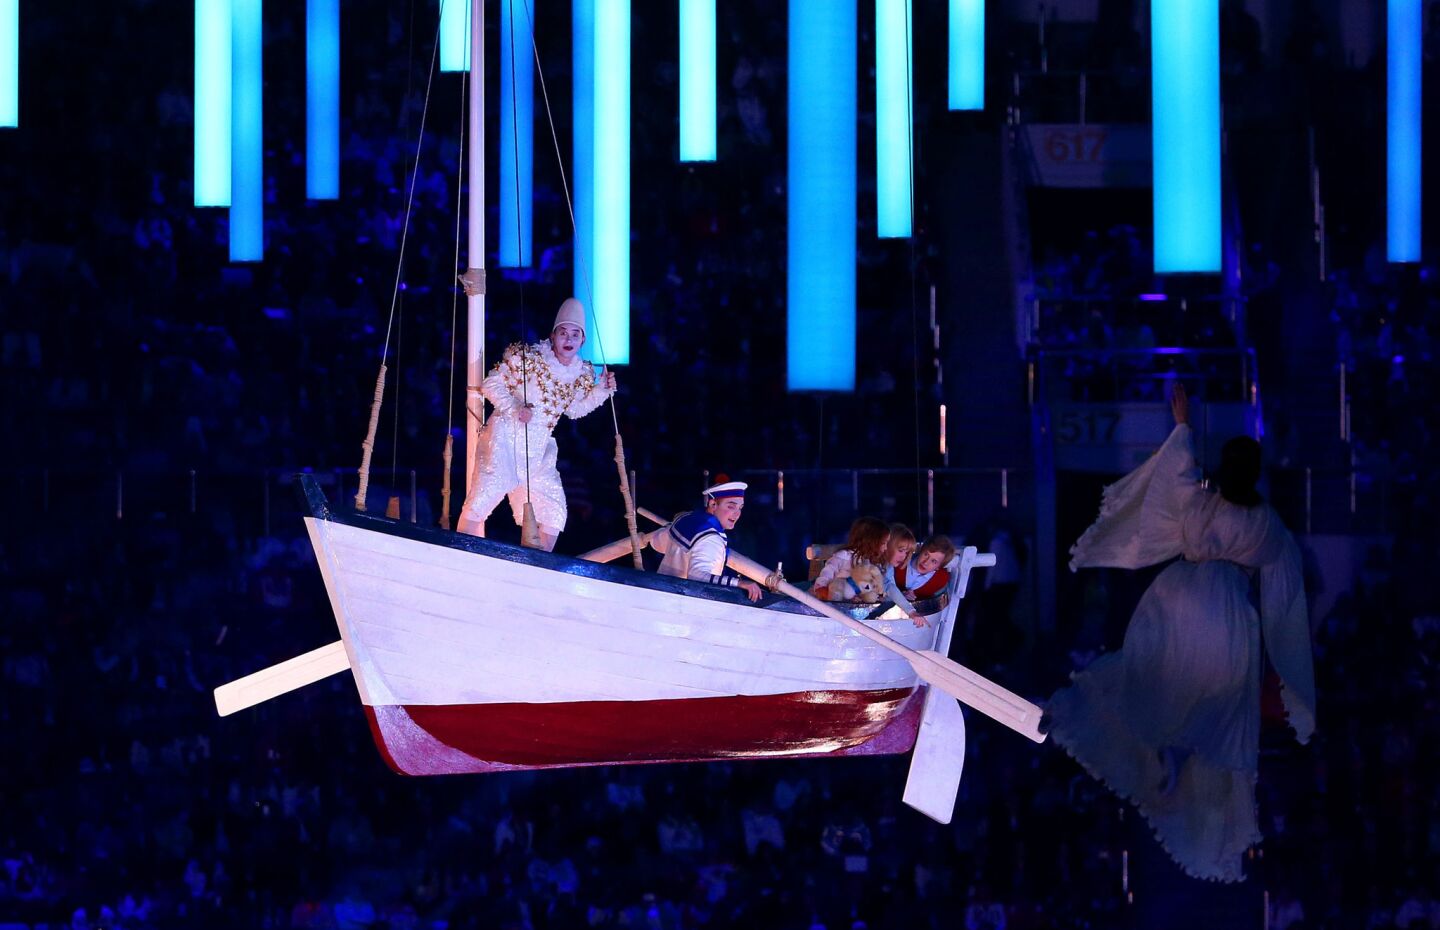 Performers in an elevated boat during the 2014 Sochi Winter Olympics Closing Ceremony at Fisht Olympic Stadium in Sochi, Russia.